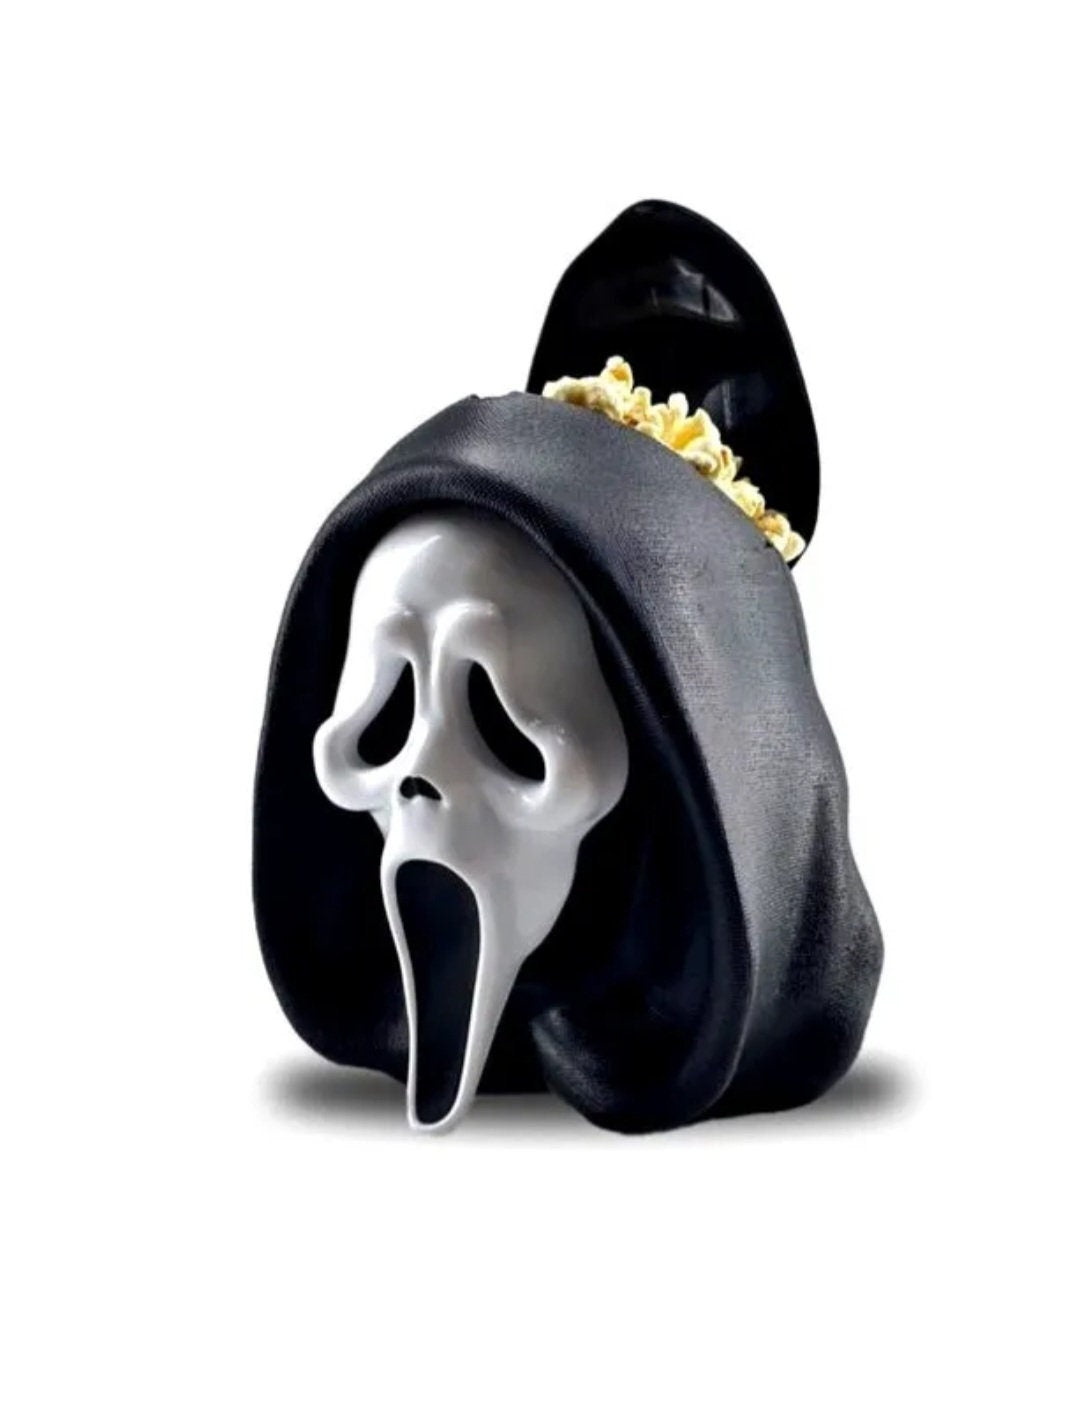 Ghostface Popcorn Container